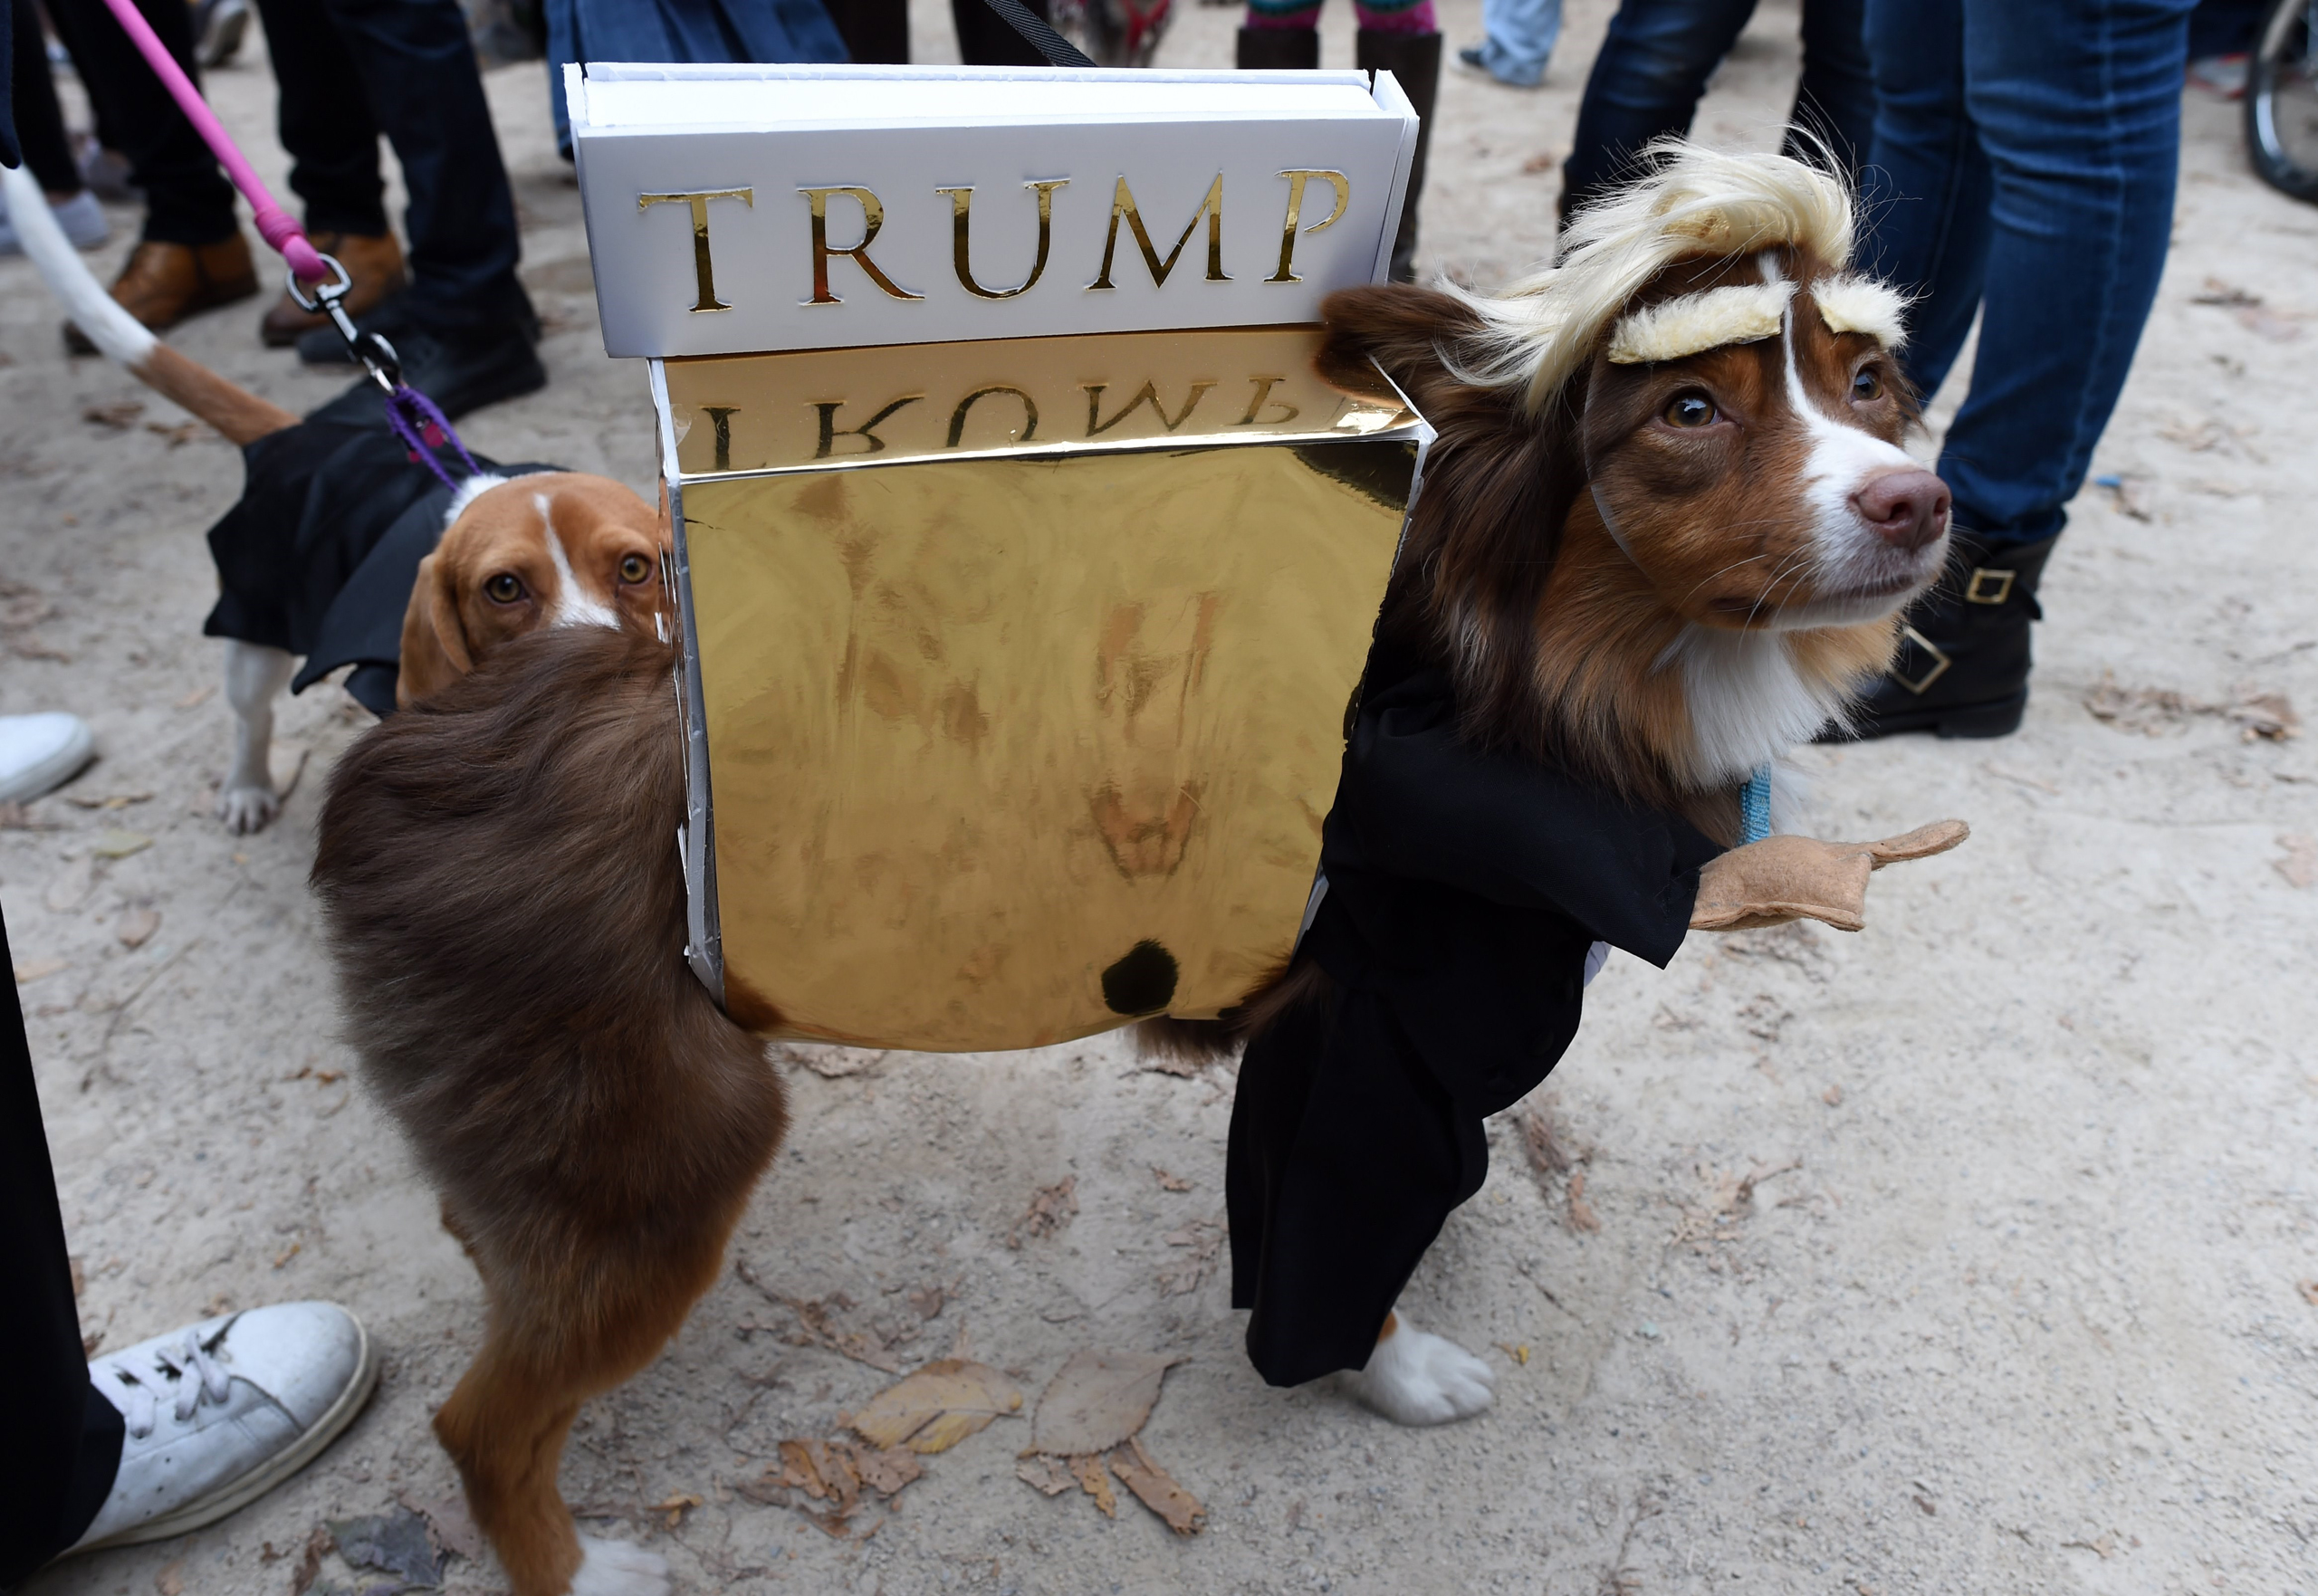 A dog dressed up as Donald Trump attends the 25th Annual Tompkins Square Halloween Dog Parade in N.Y., on Oct. 24, 2015.